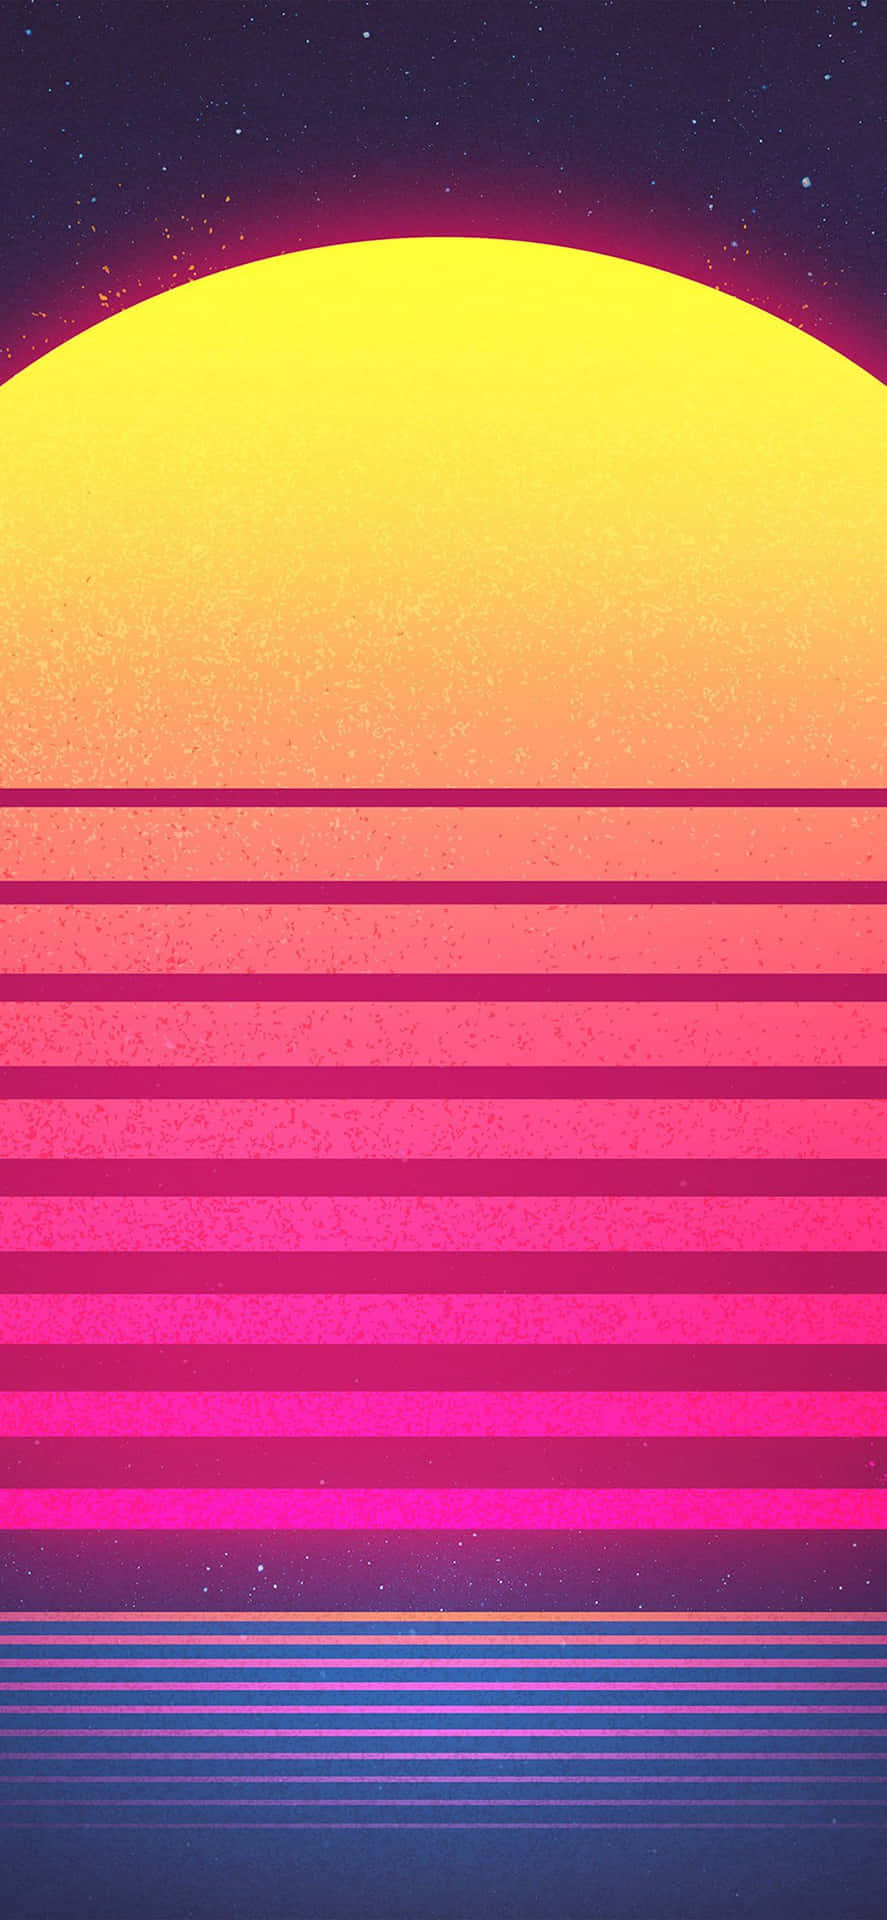 A Retro Sunset With A Pink And Yellow Background Wallpaper